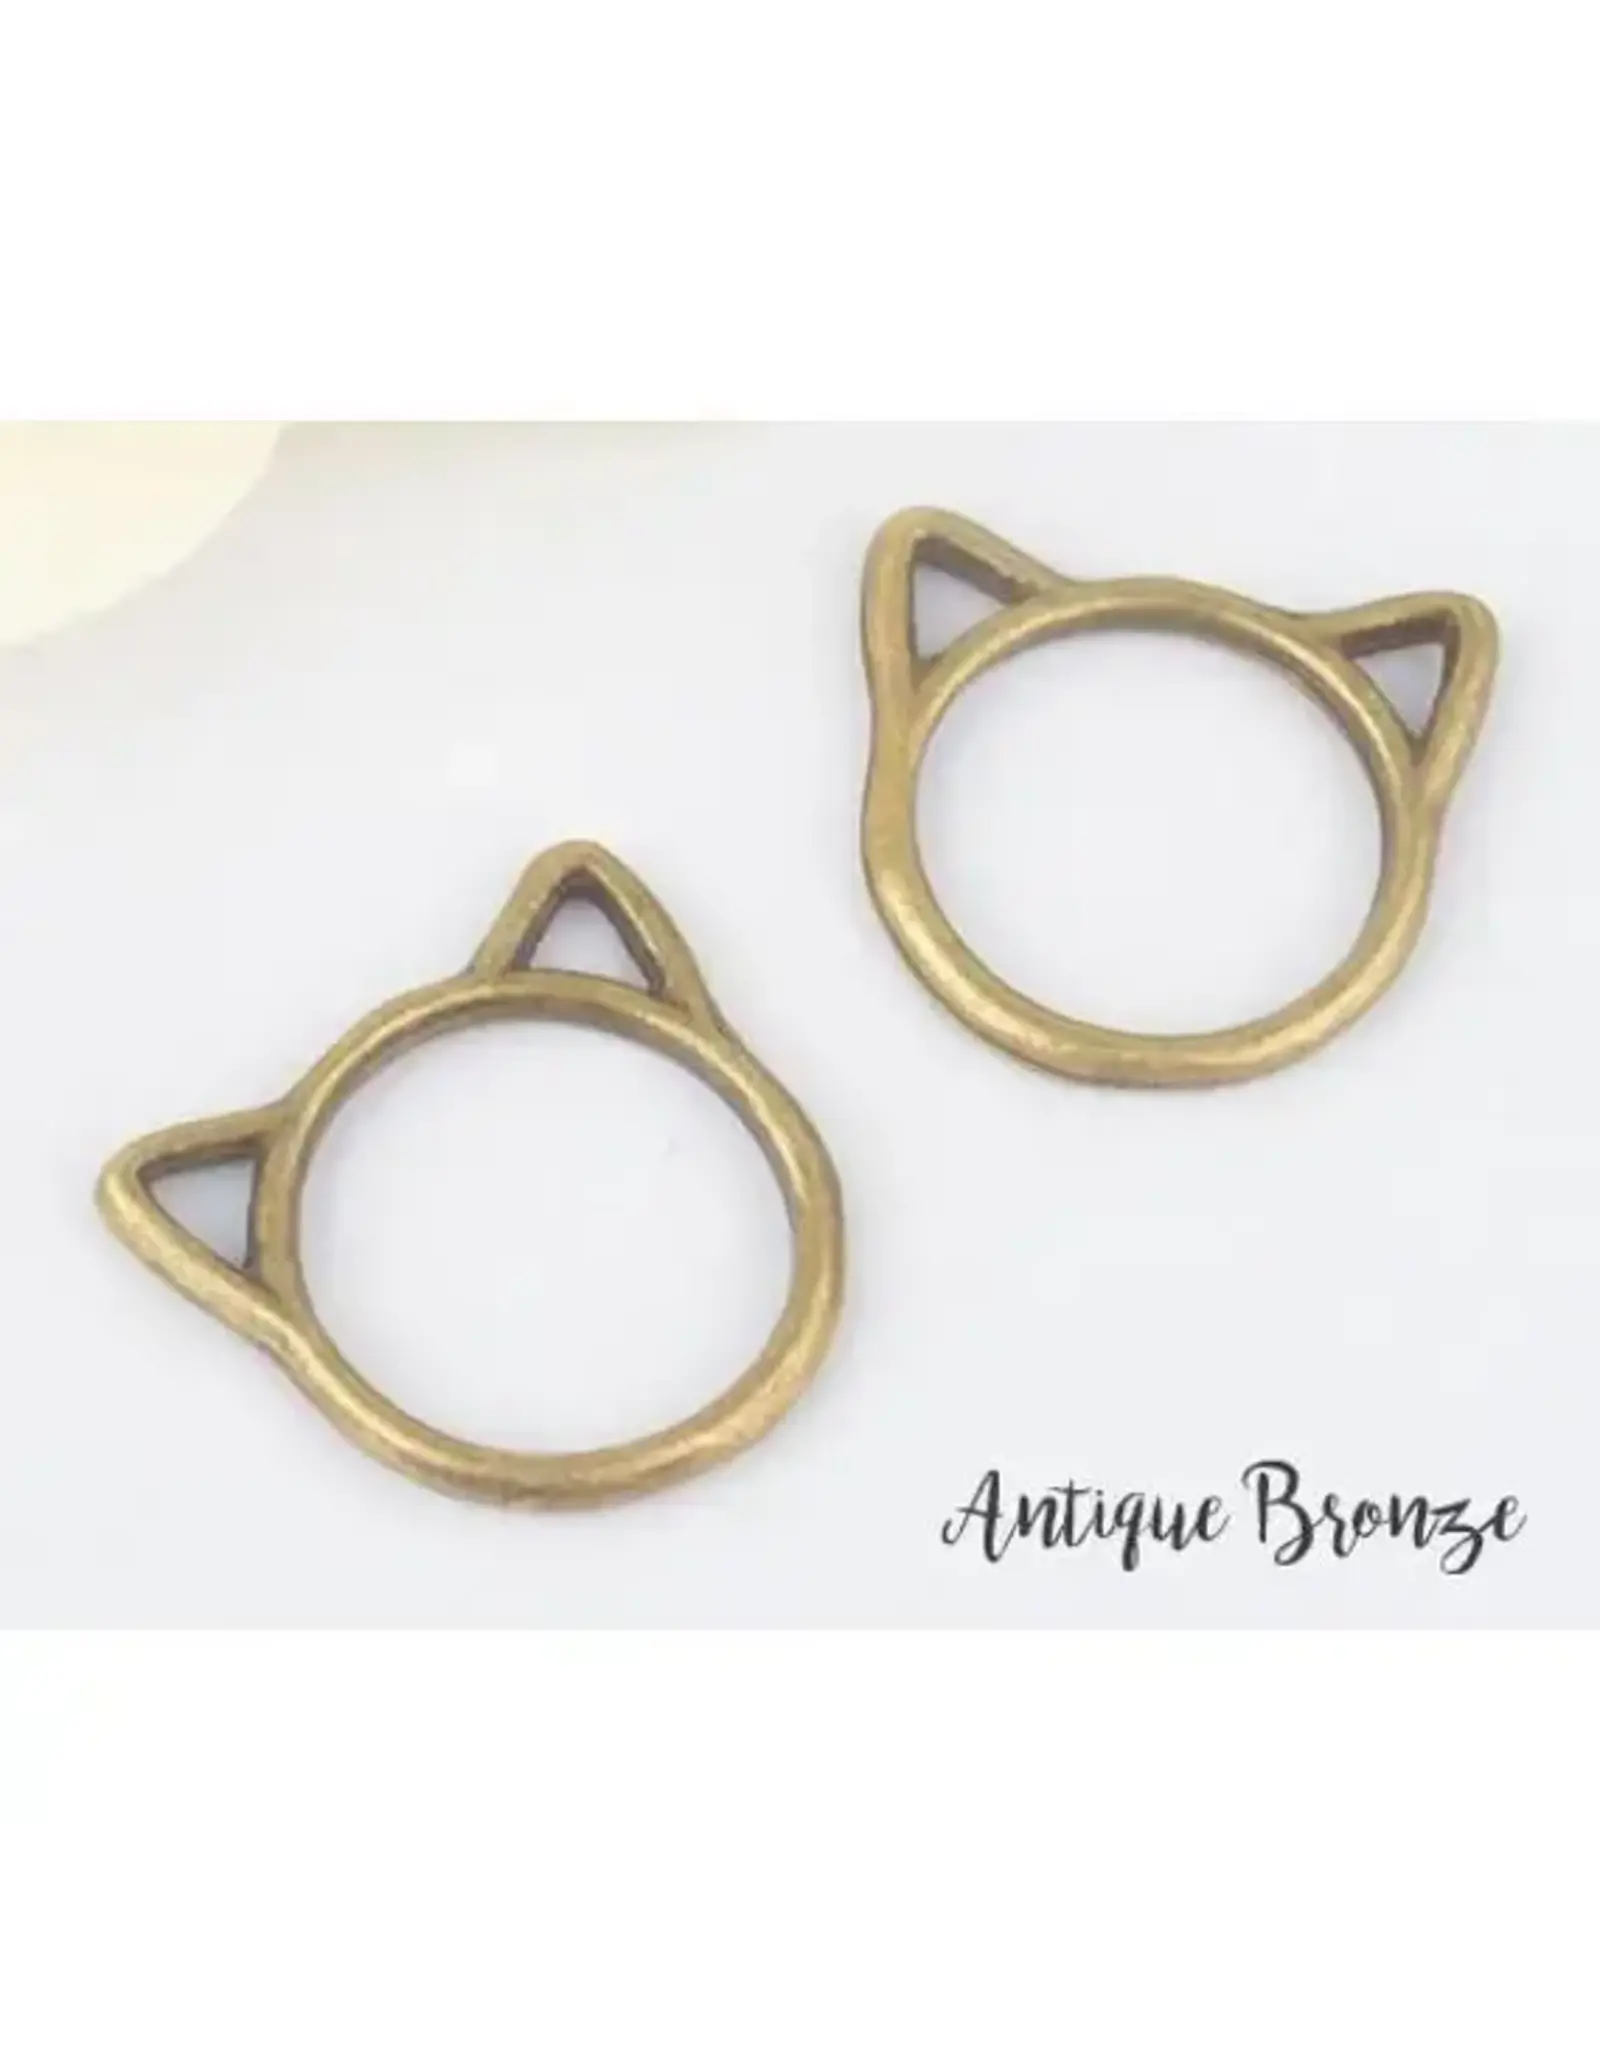 Laura Hand Knits Cat Stitch Markers - Antique Bronze - Laura Hand Knits